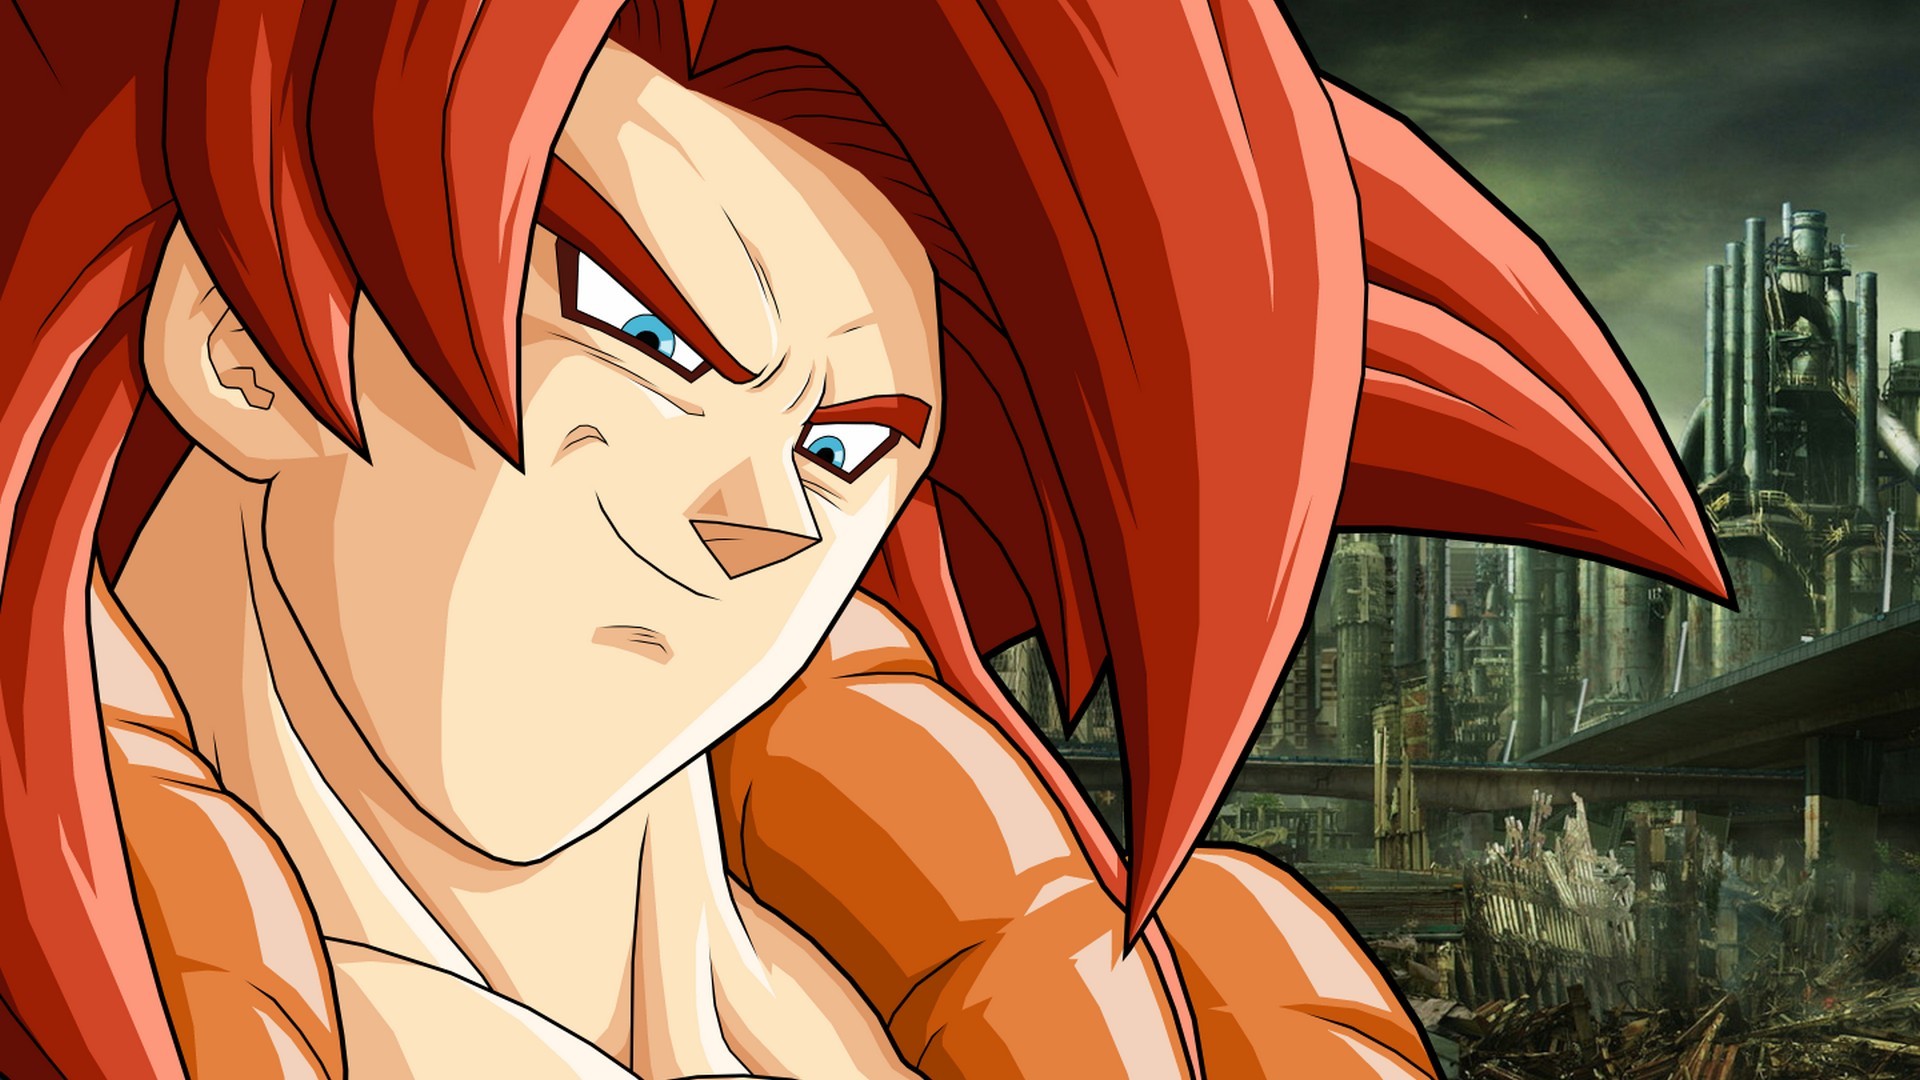 Wallpaper Goku SSJ4 Desktop with resolution 1920X1080 pixel. You can use this wallpaper as background for your desktop Computer Screensavers, Android or iPhone smartphones